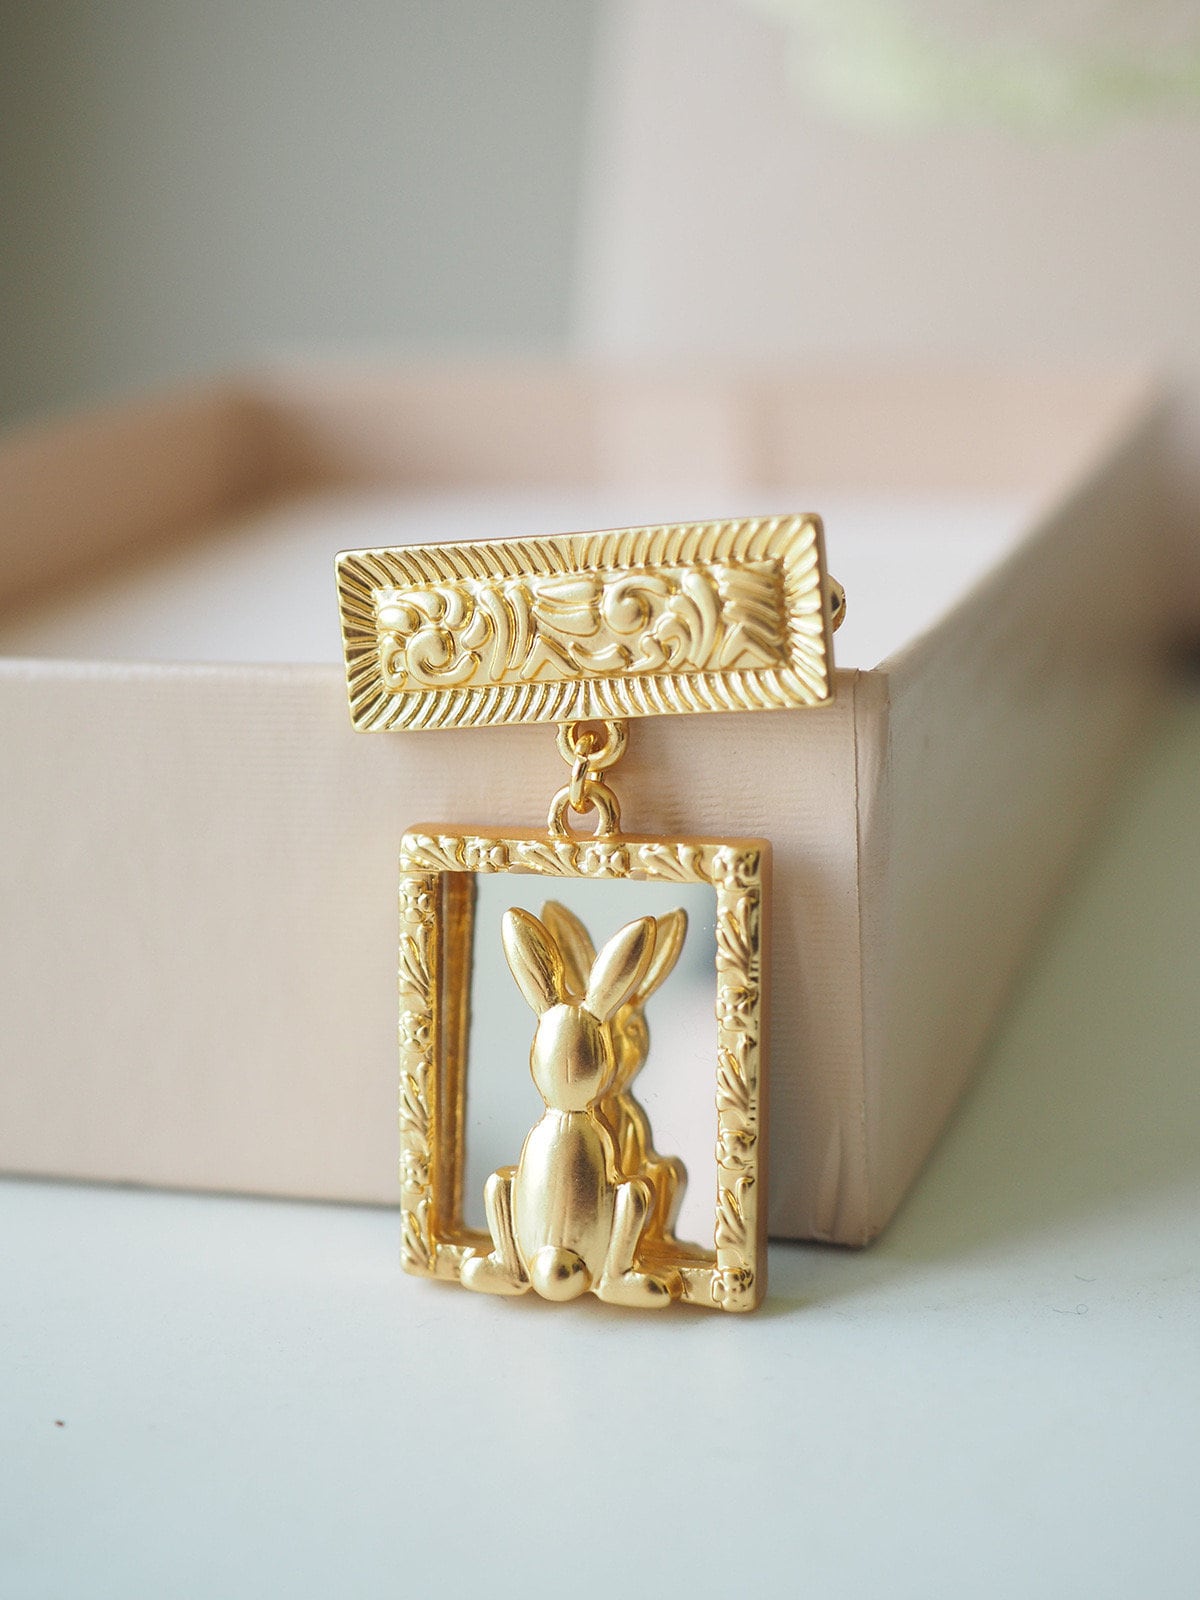 EUROPEAN VINTAGE 100% Authentic Genuine Rabbit with Mirror Brooch in Gold, 1990's